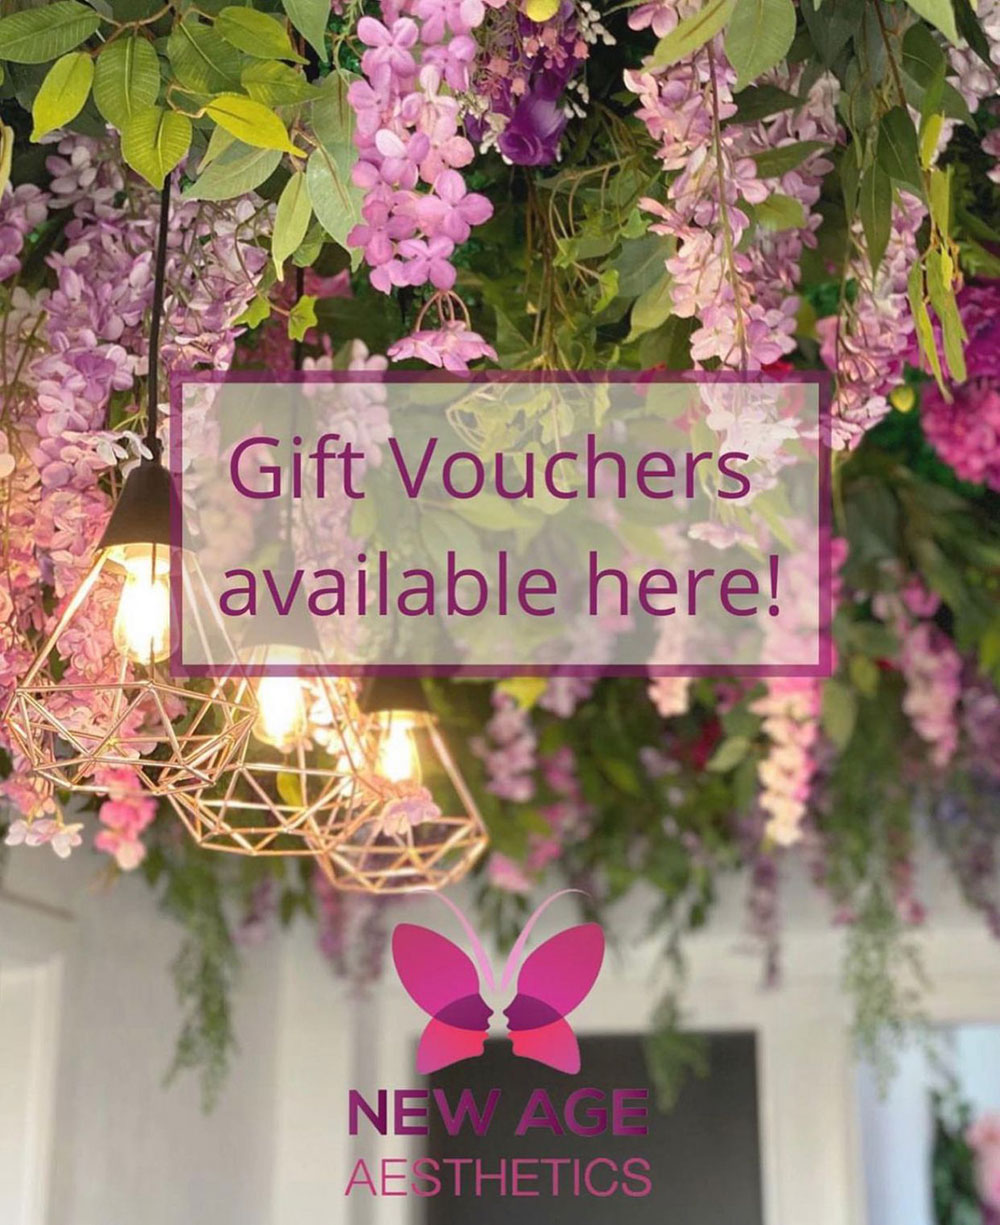 New Age Aesthetics gift vouchers pic